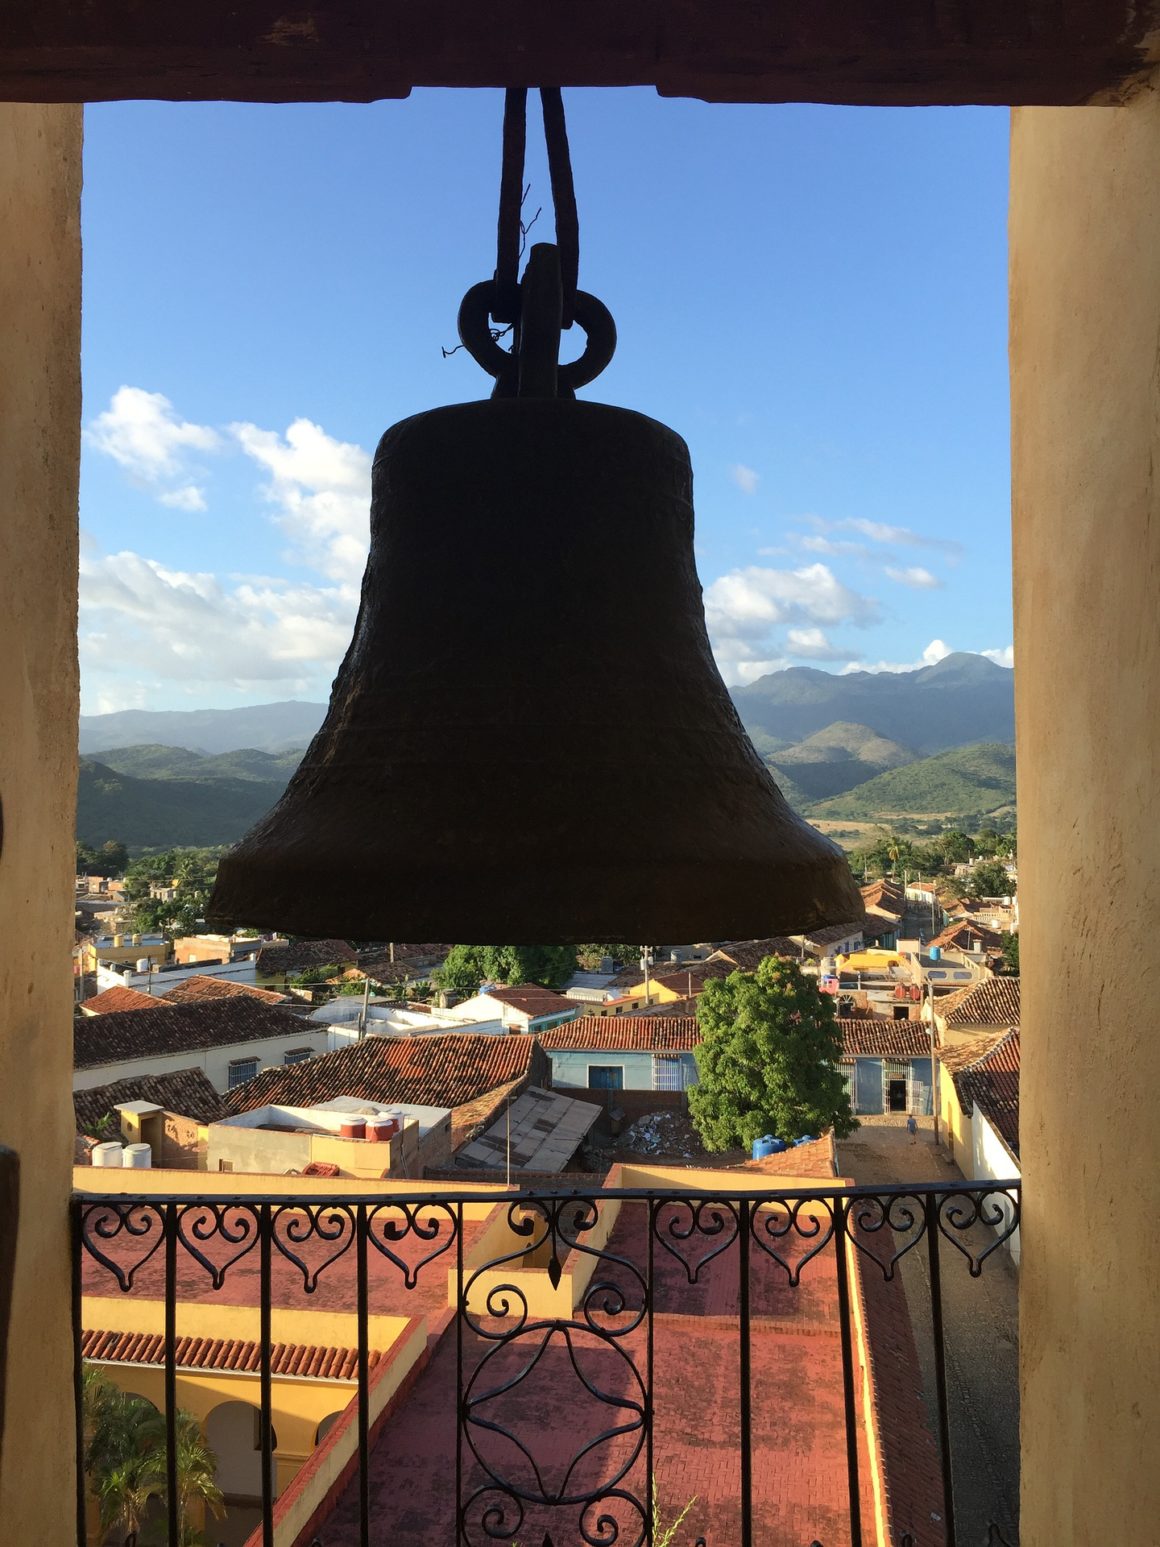 Climb the Bell Tower - things to do in Trinidad